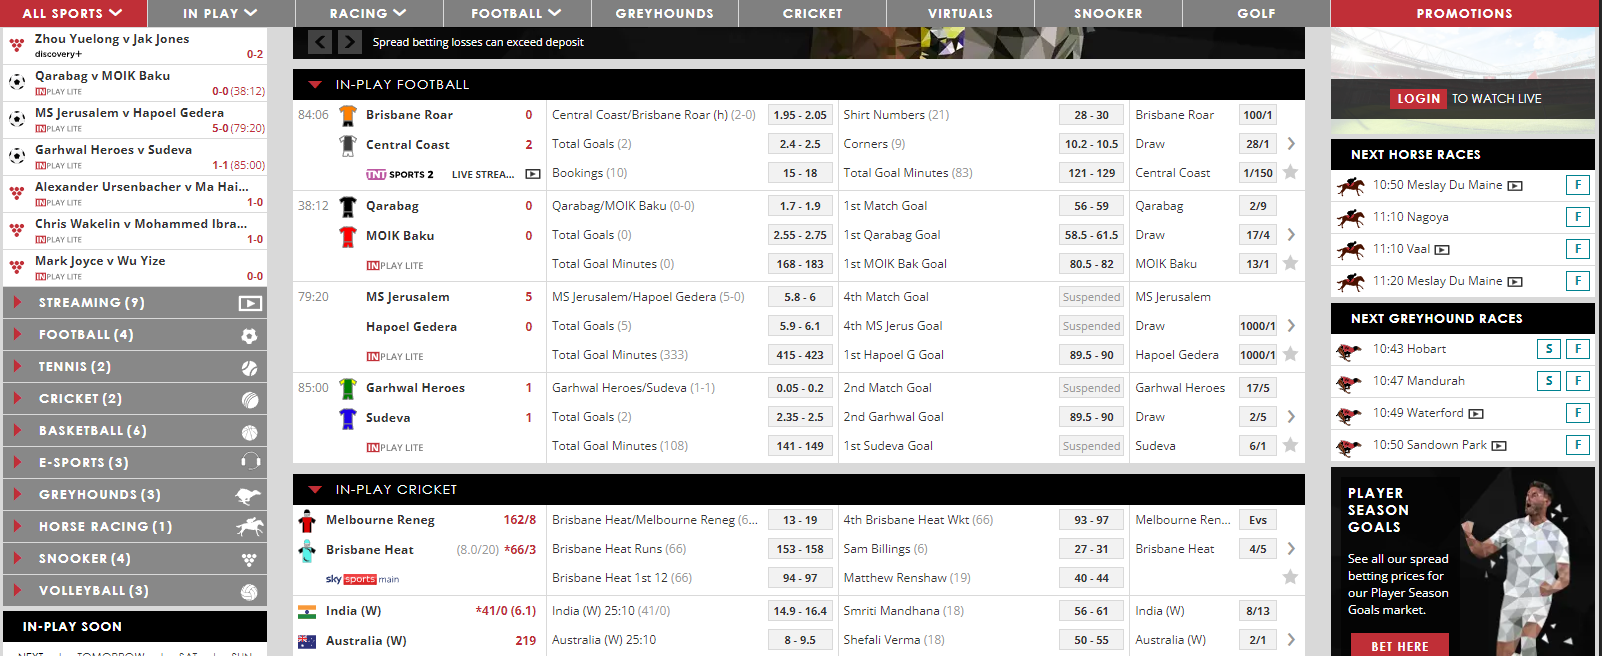 home page of the sports betting section - screen shot